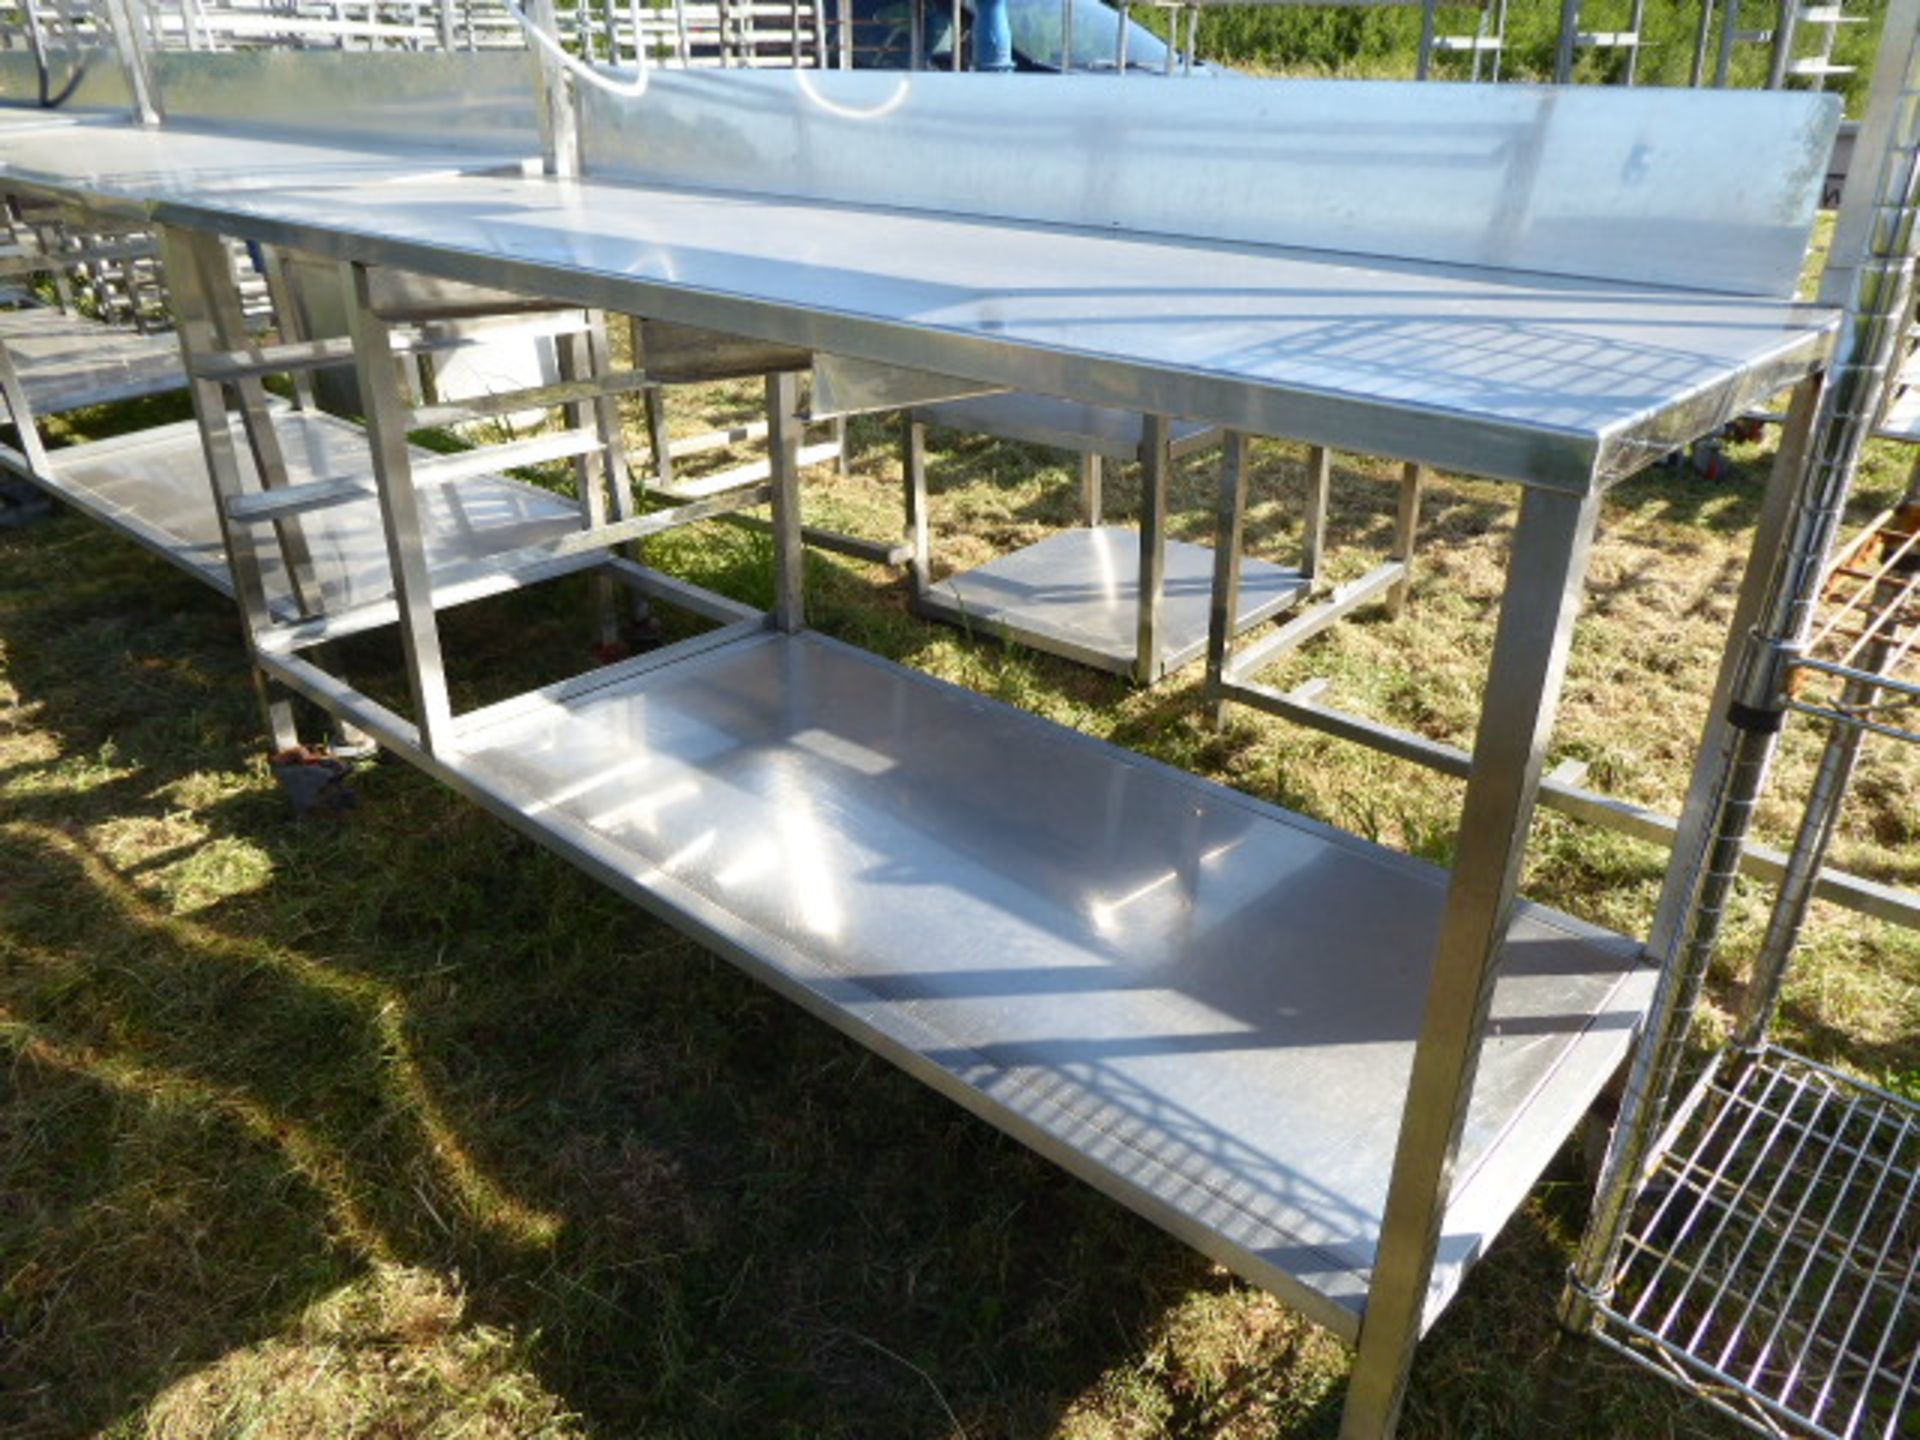 Stainless steel mobile food preparation station with 2 shelves over, shelf under space for trays, - Image 3 of 3